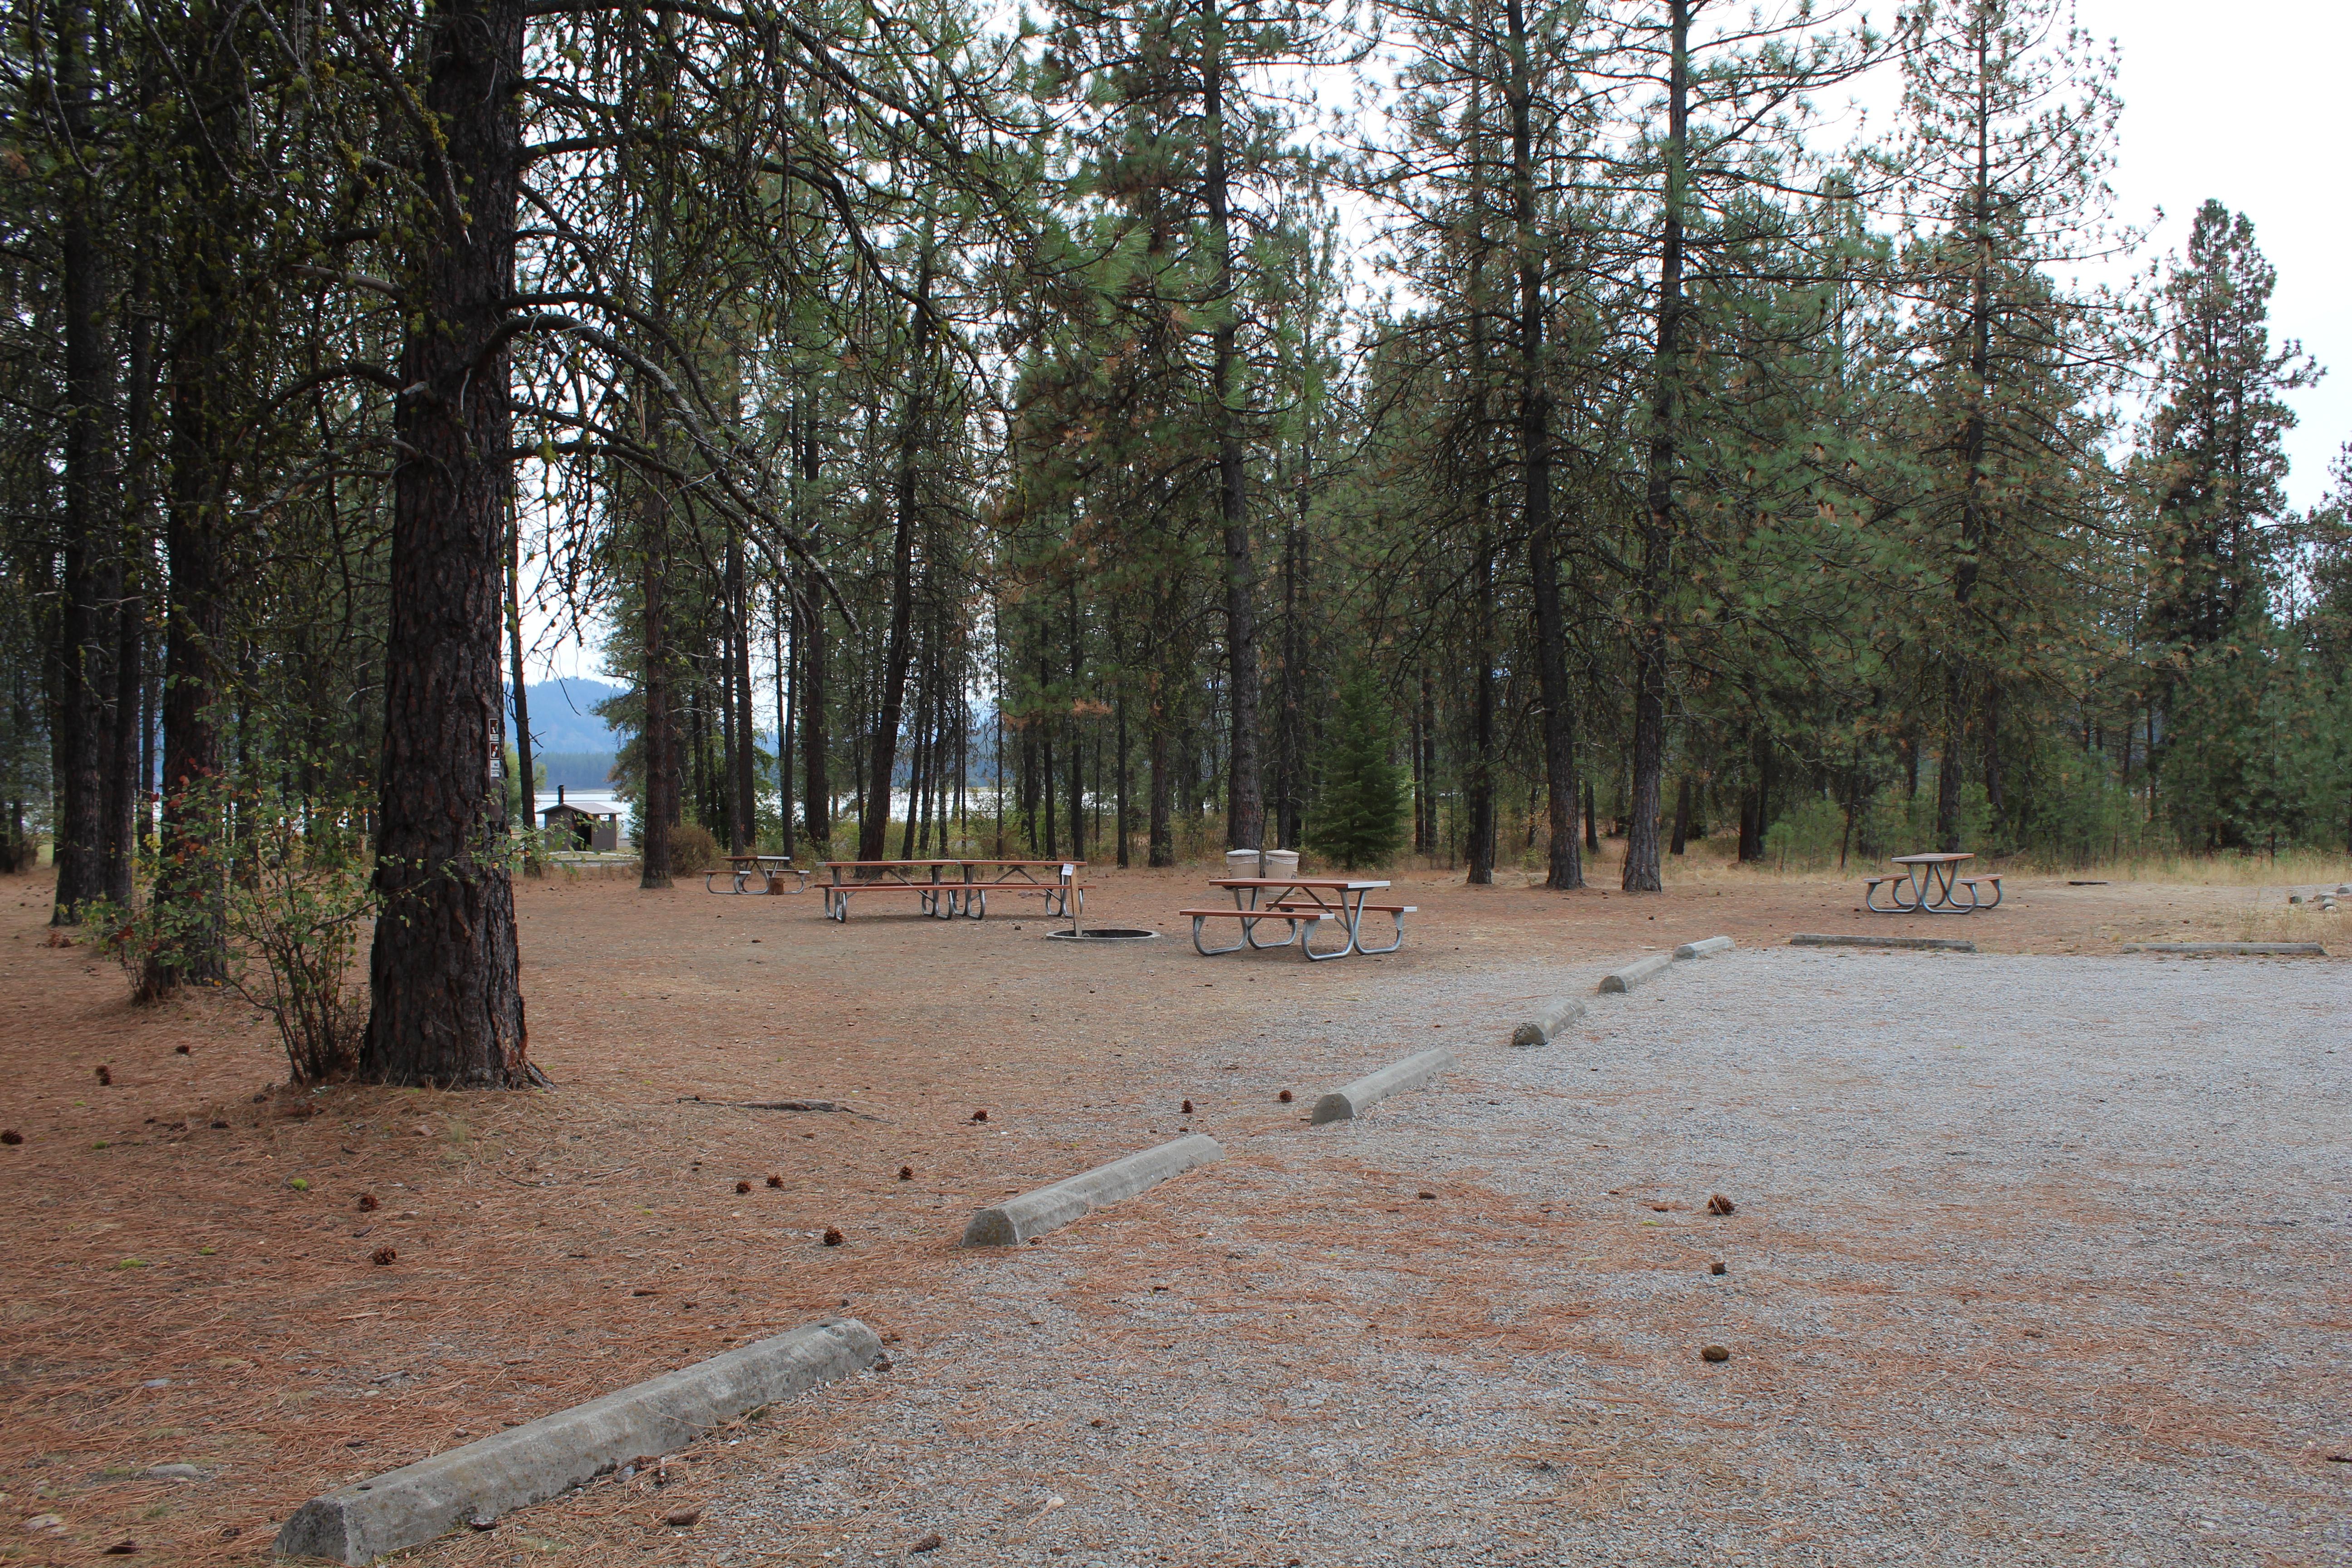 The group site with picnic tables, paved park, fire ring, bathroom, and lake view.